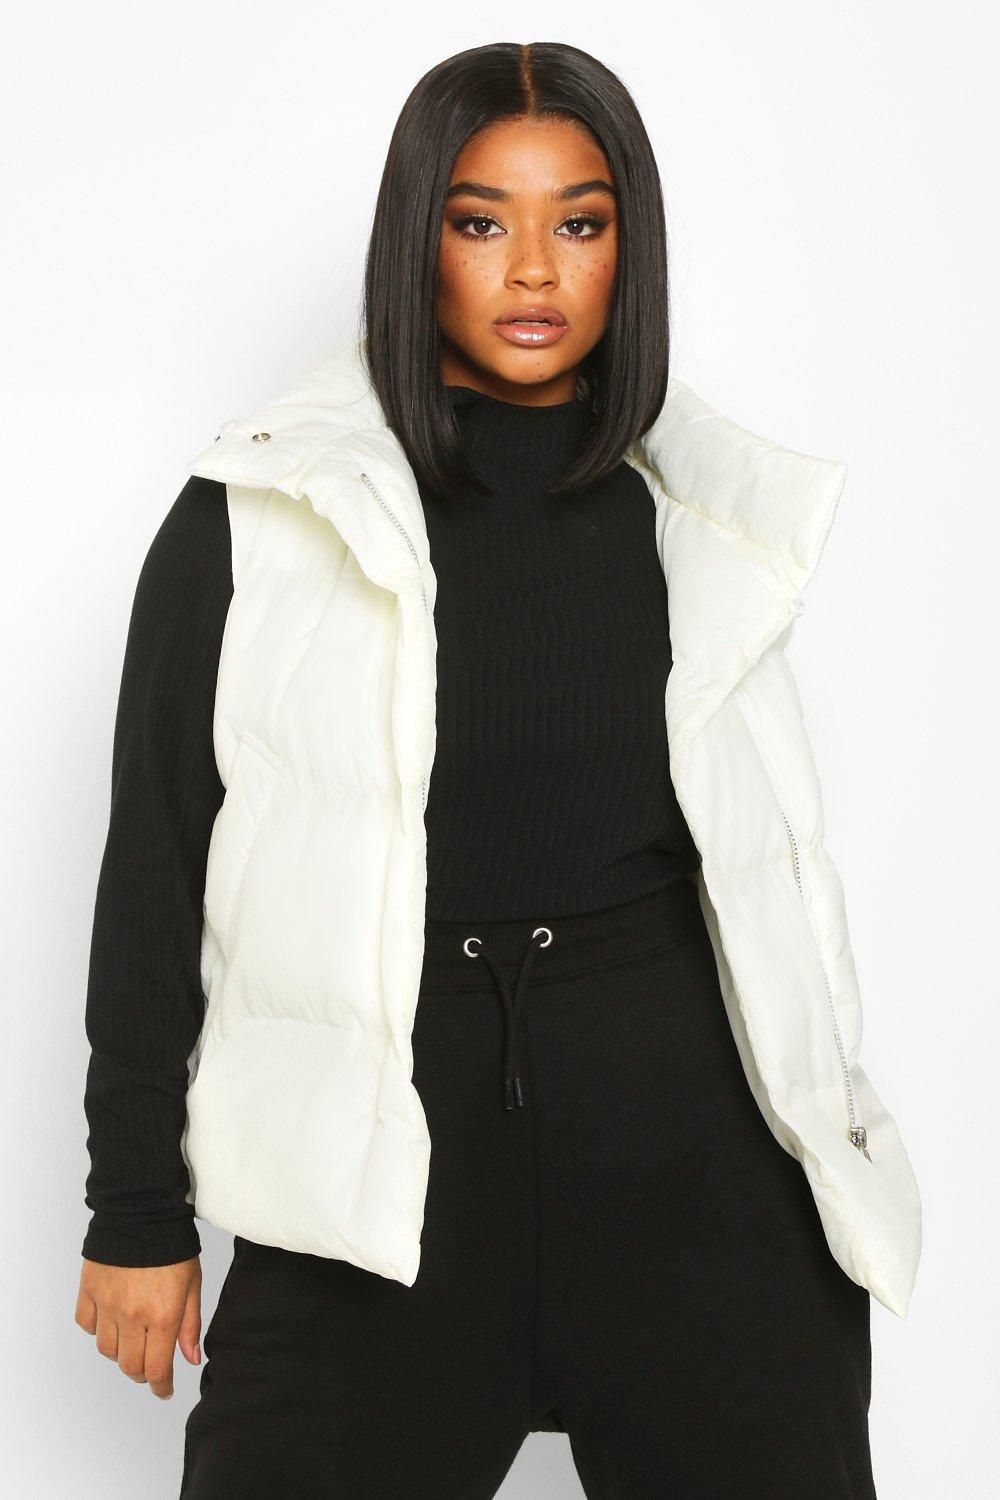 Dkny Puffer Vest Cheapest Wholesale, 63% OFF | connect-summary.com